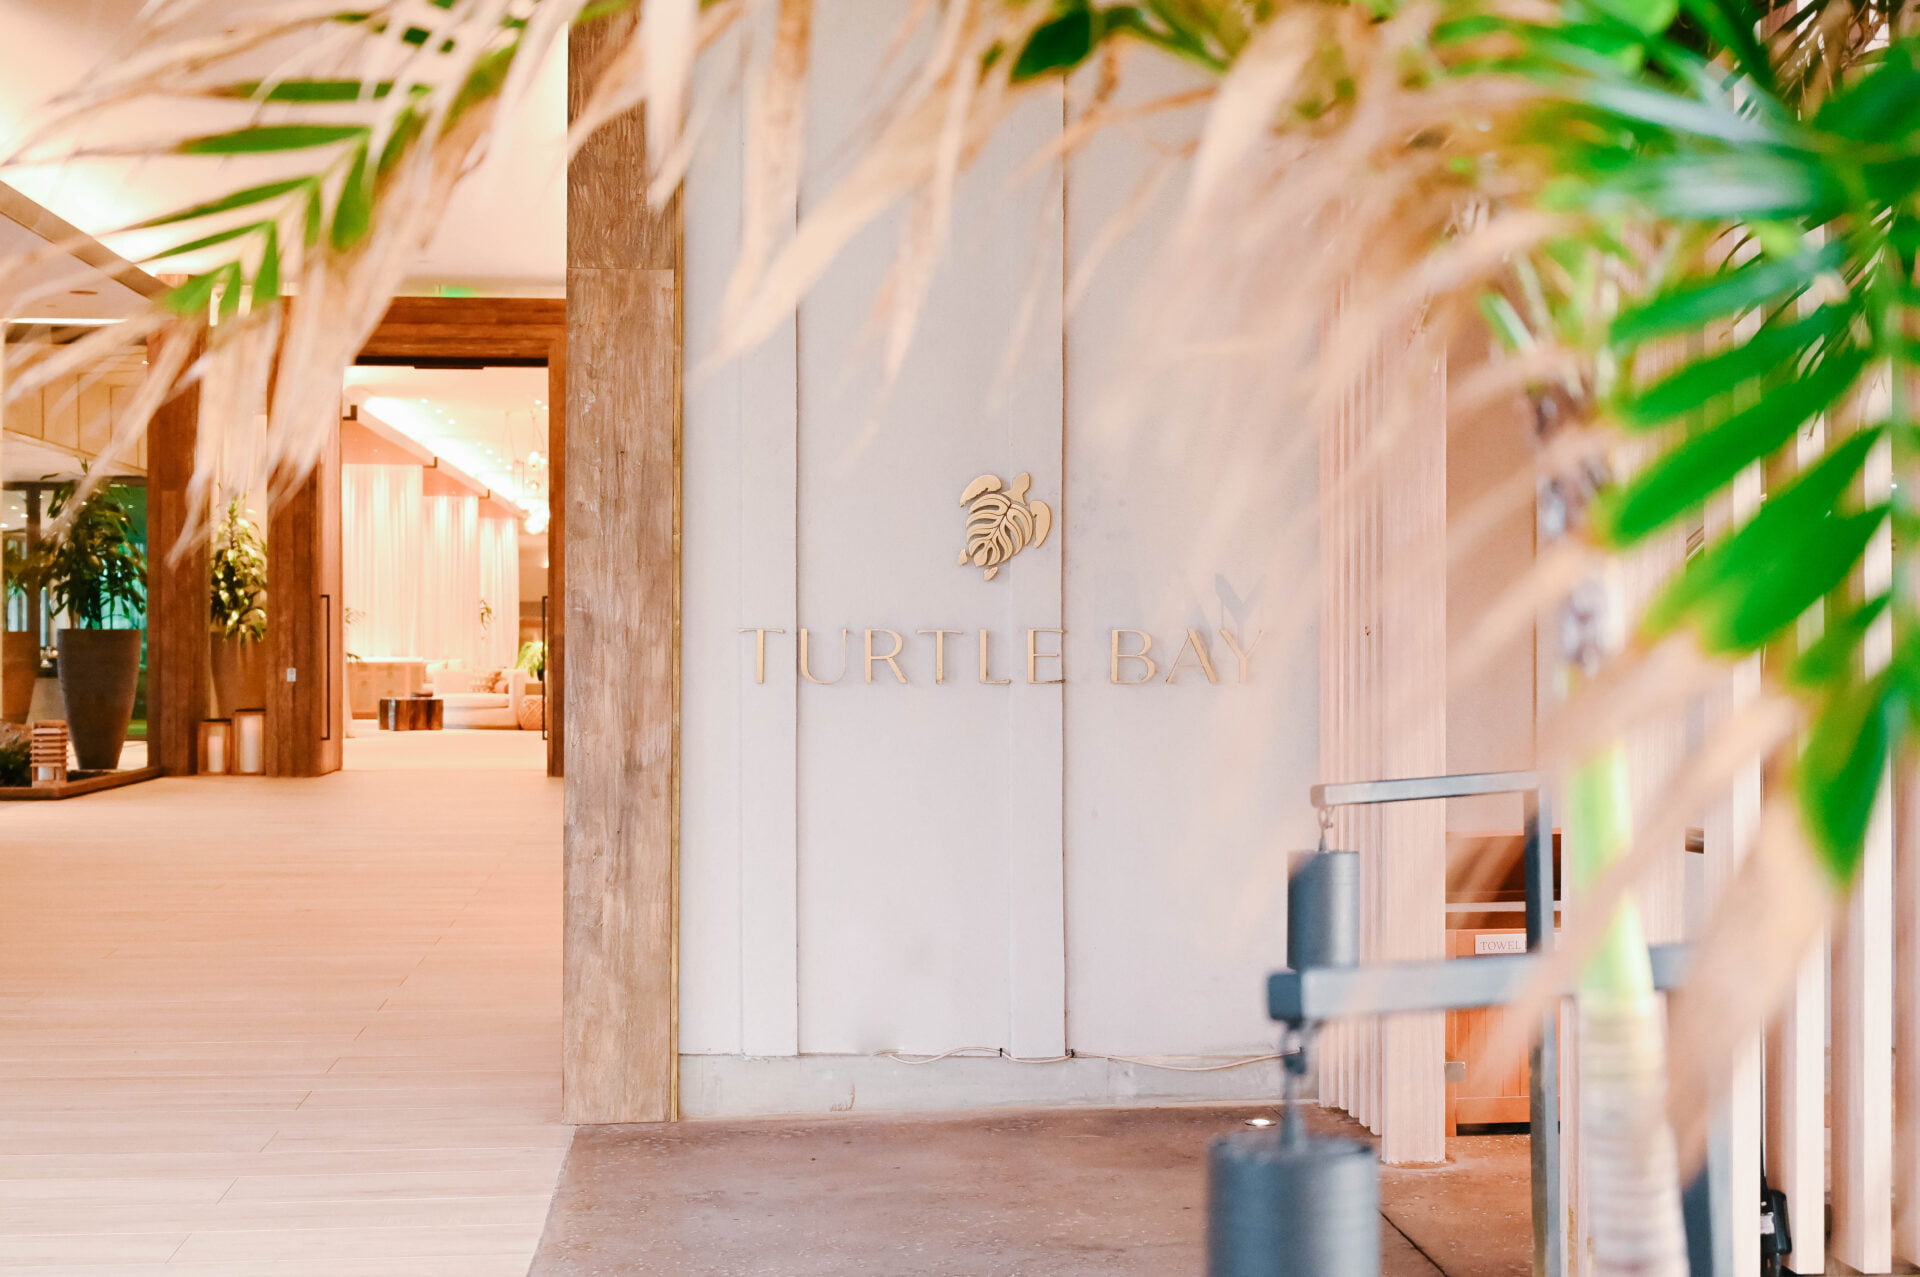 view of the front entrance lobby at turtle bay resort